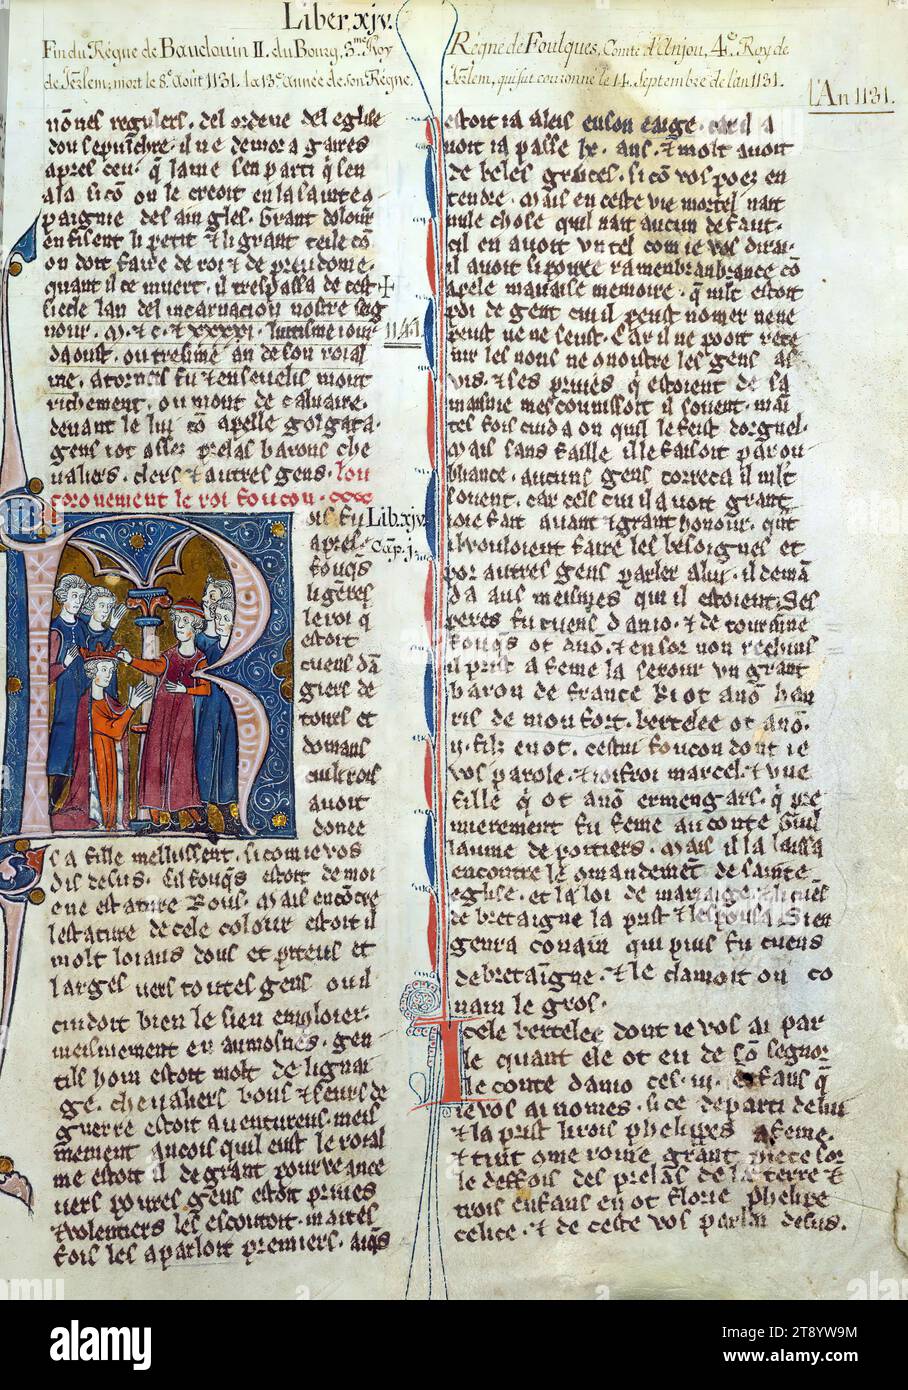 William of Tyre's Histoire d'Outre Mer, Initial 'R' with the coronation of King Fulk, This manuscript, completed in the later part of the thirteenth century, contains William of Tyre's Estoire d'Eracles (to 1229), Les Faits des Romains (continuation, Tiberius to Julian), and a letter of Prester John. While the origin of the manuscript is debatable between Acre and Paris, Jaroslav Folda suggests a strong connection with Epinal 45, a manuscript known to have been created in Paris during this same time Stock Photo